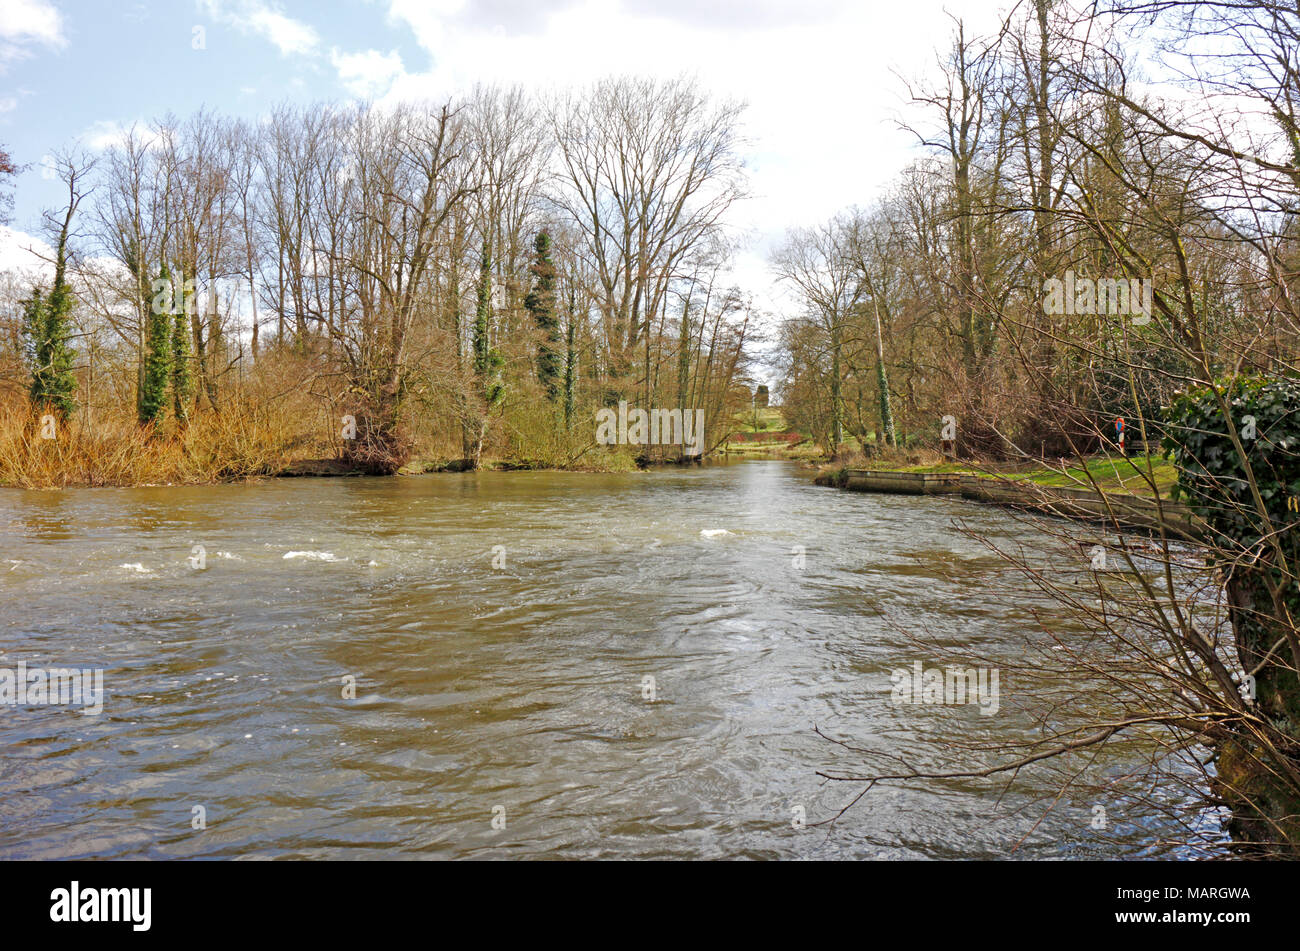 The River Bure downstream of the former watermill at Horstead on the Norfolk Broads near Coltishall, Norfolk, England, United Kingdom, Europe. Stock Photo